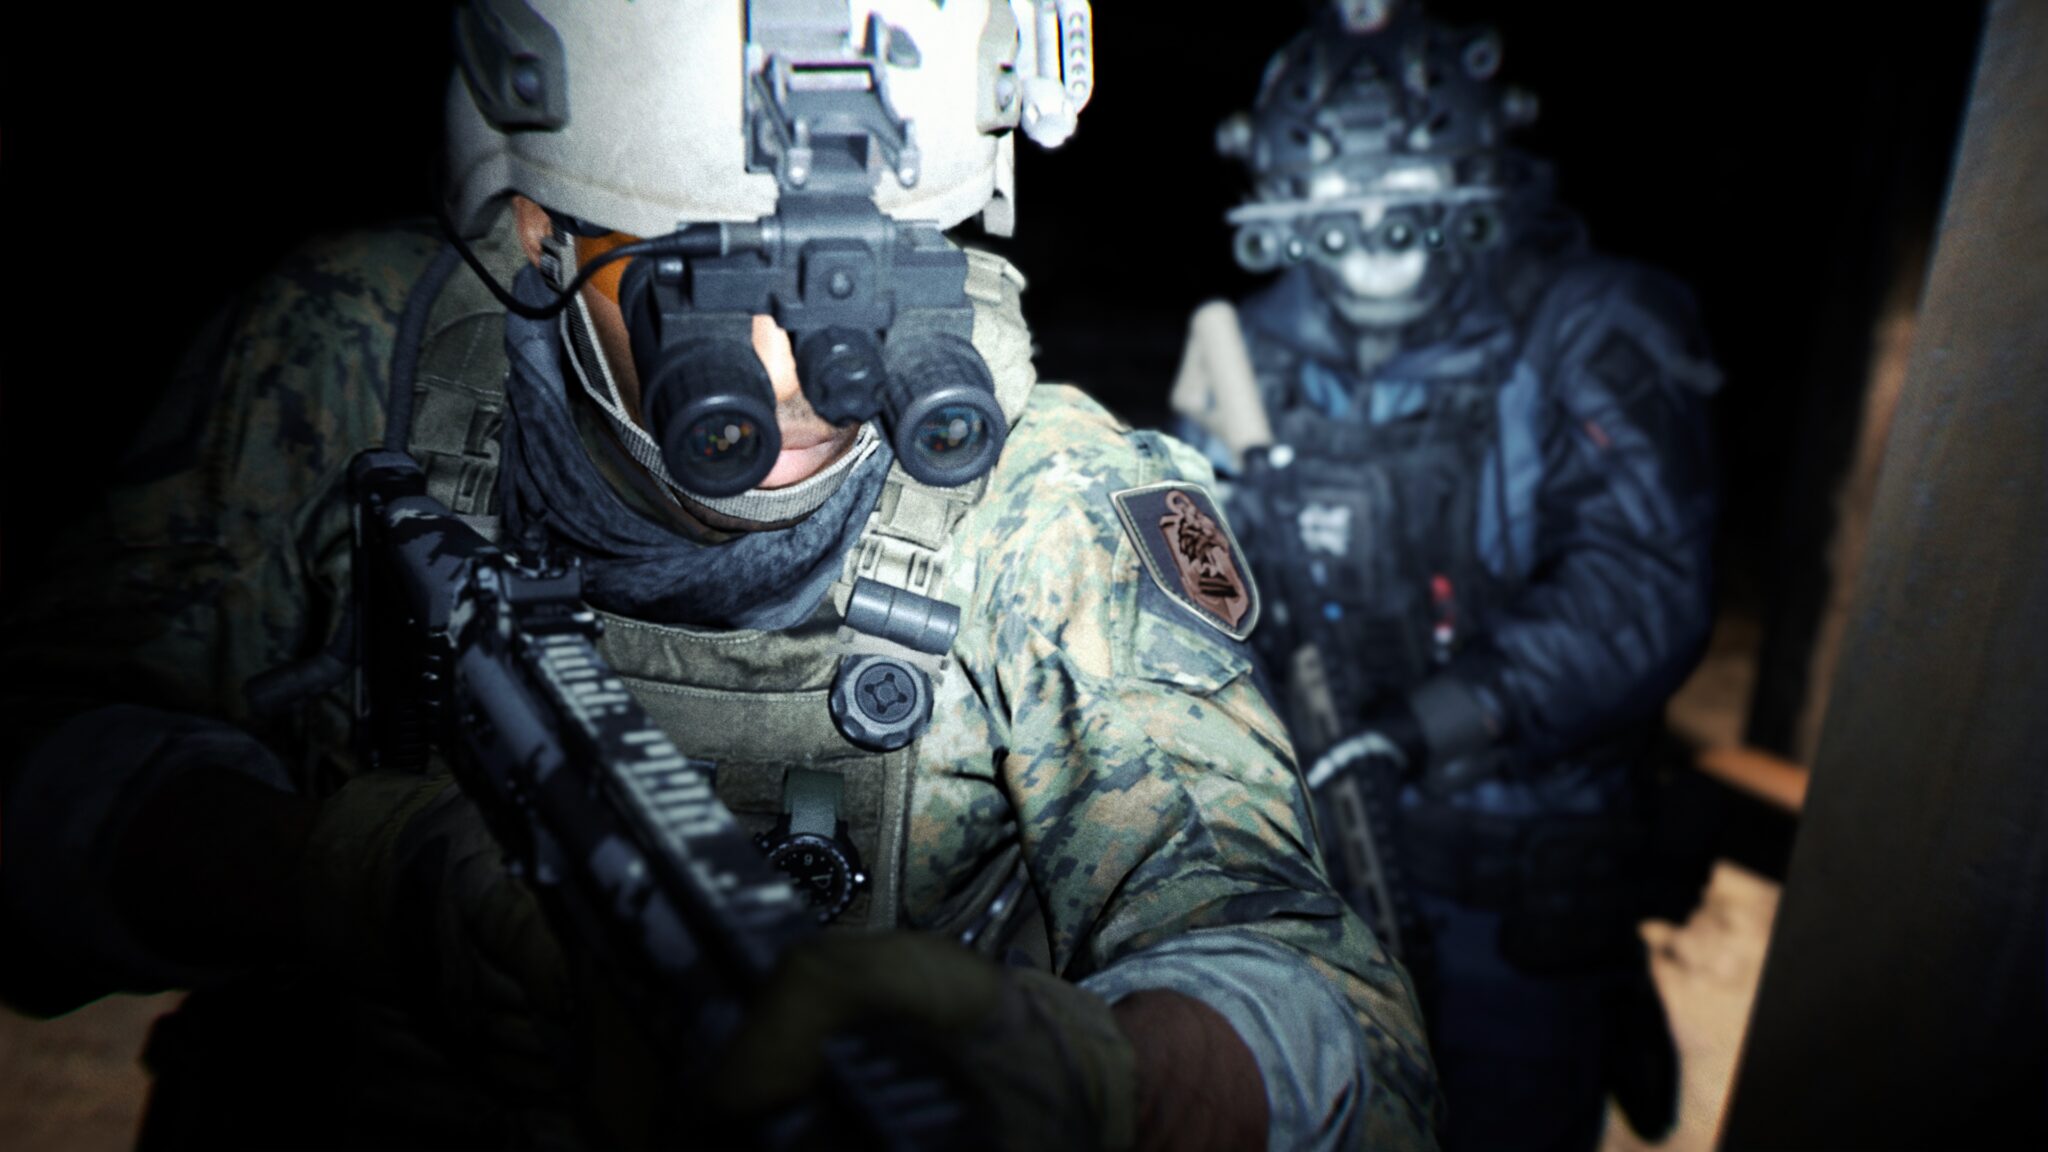 (In missions in the dark, Task Force 141 relies on high tech equipment, like these NVGs. Night vision was one of the big marketing buzzwords for the 2019 predecessor, but then played more of a supporting role).